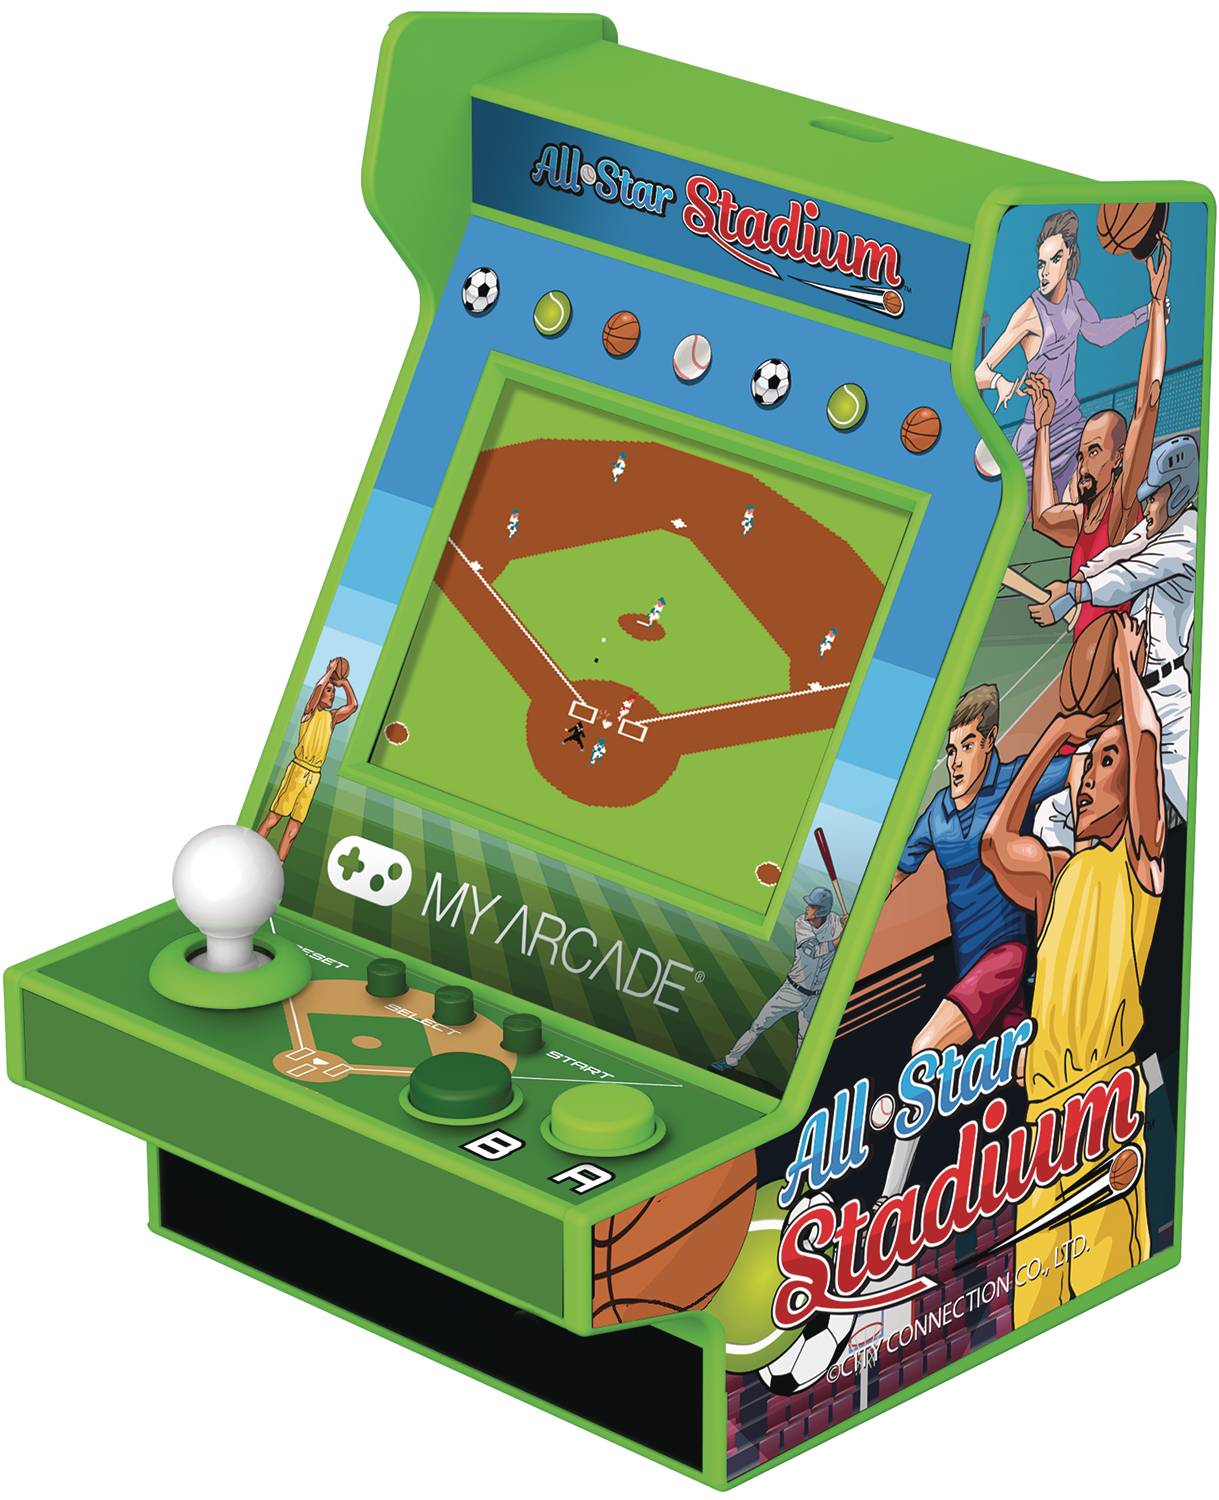 NANO PLAYER 4.5IN ALL-STAR STADIUM COLLECTIBLE RETRO SYSTEM